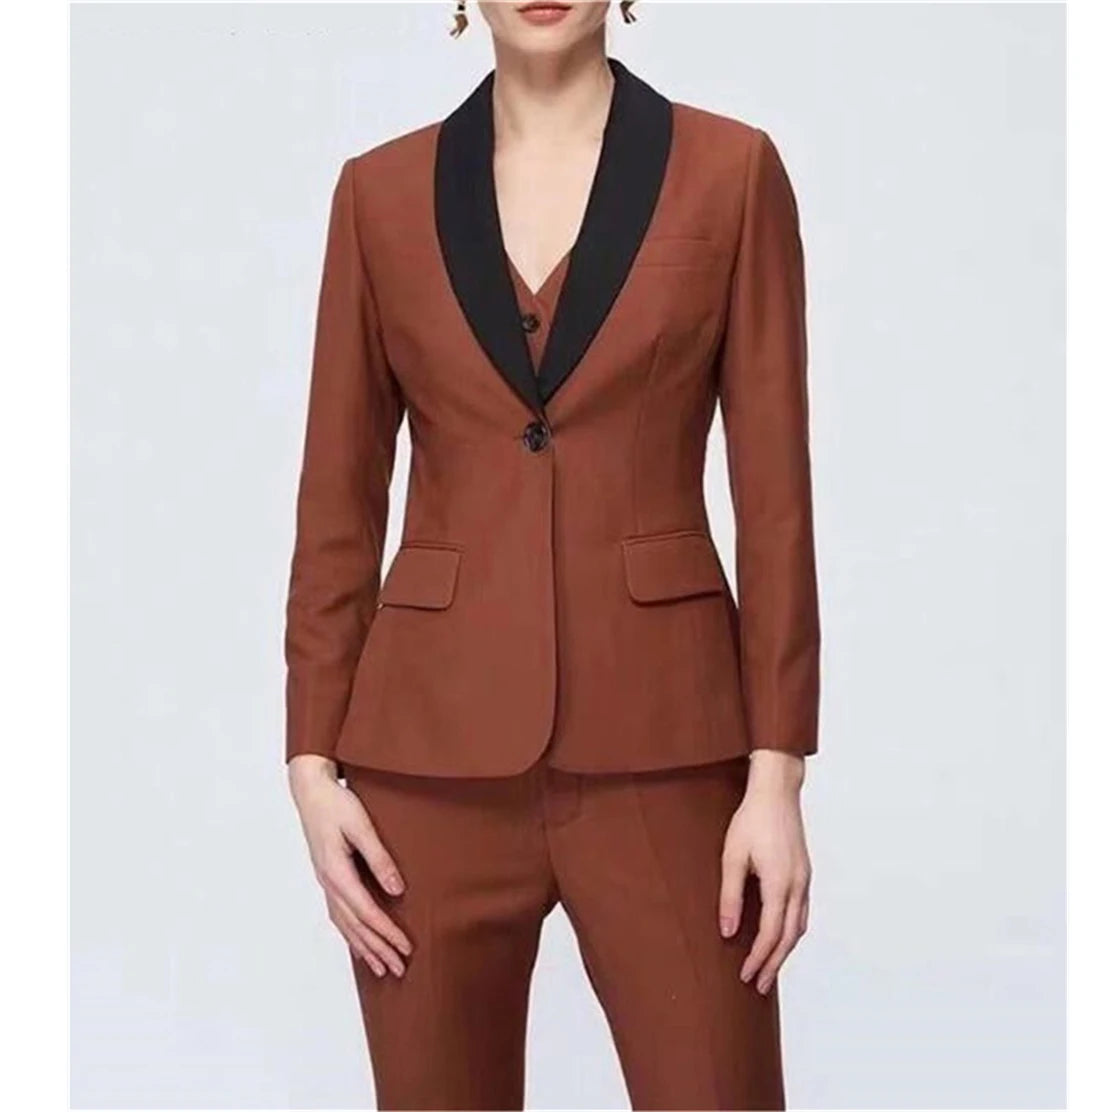 Women Business Suits Blazer Terno Jacket Pants Vest Thress Piece Single Breasted  Shawl Lapel Outwear Costume